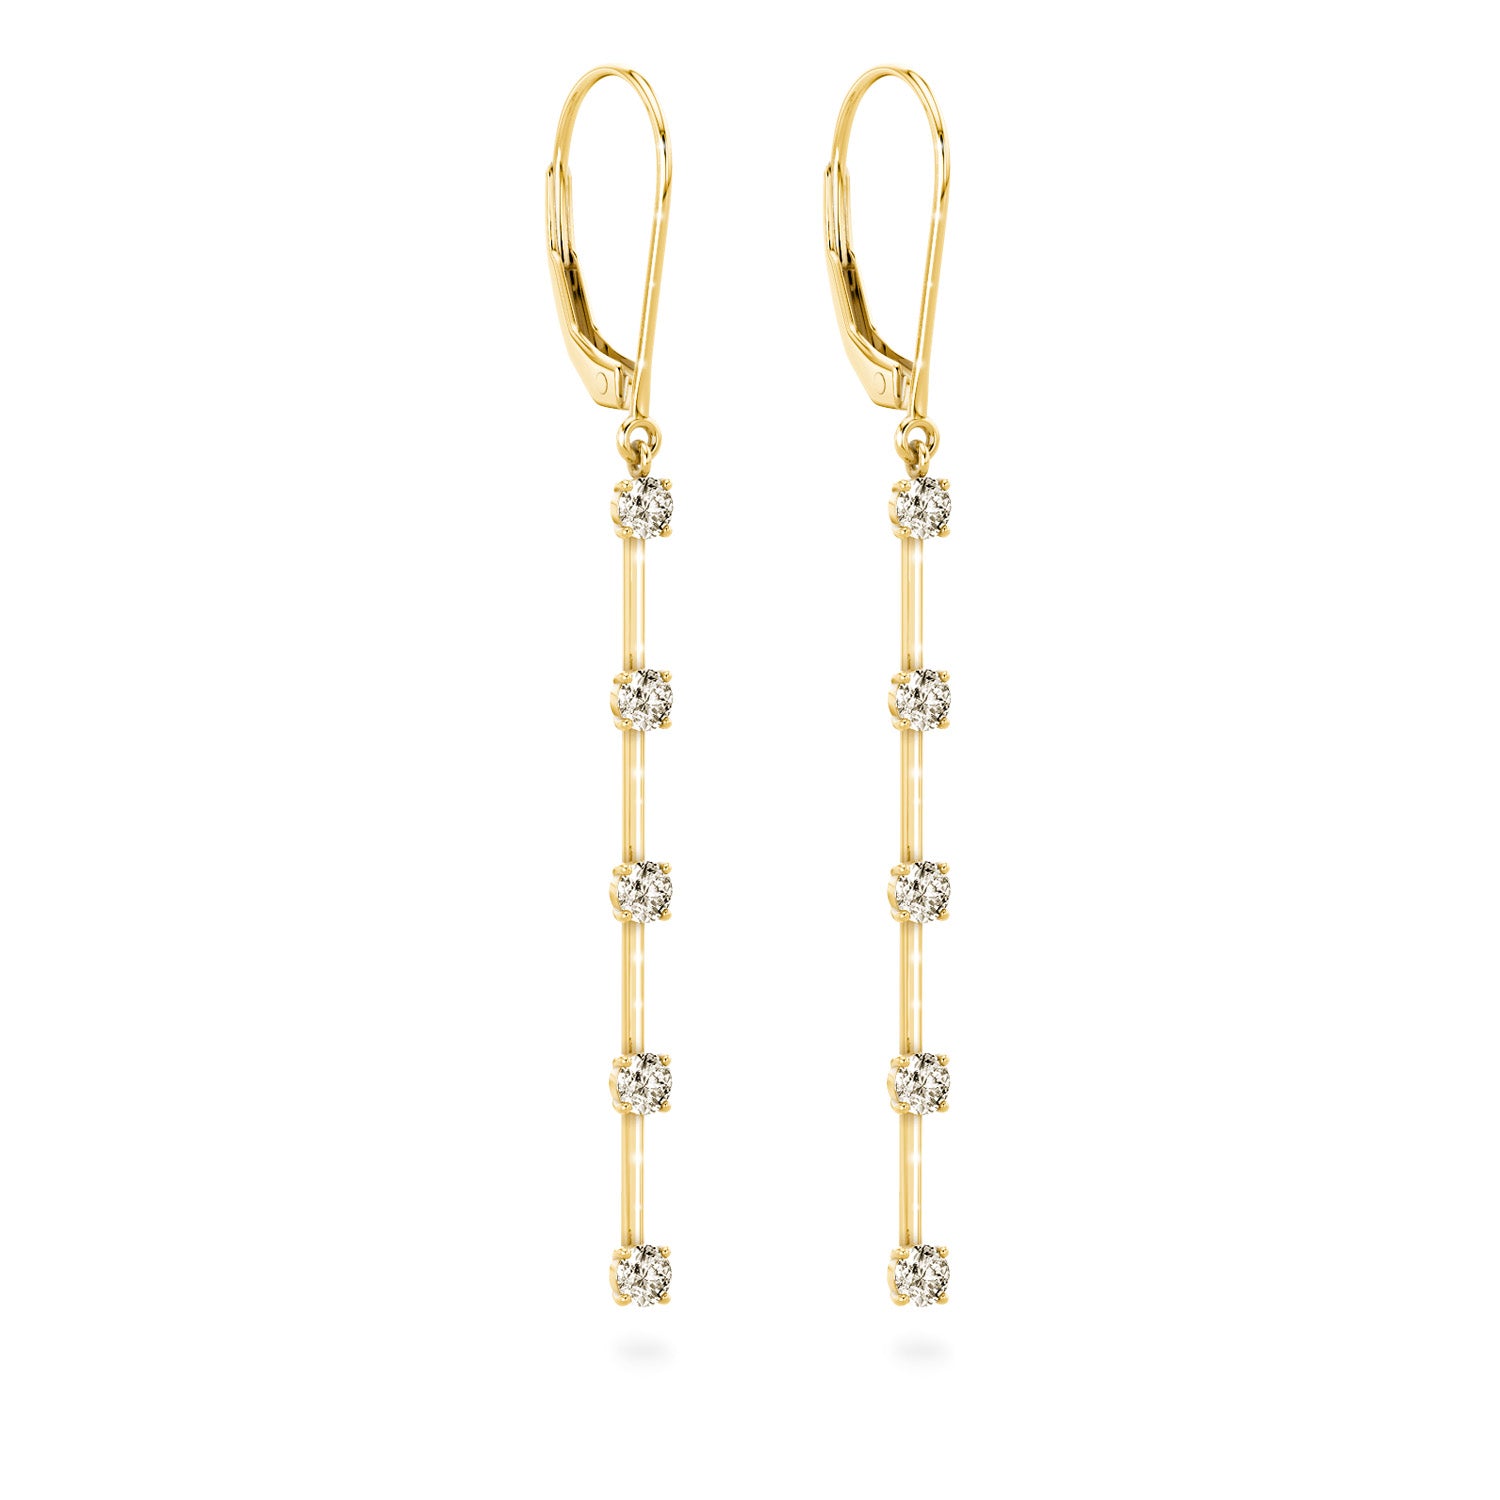 Shimansky - Line Drop Diamond Earrings 1.40ct crafted in 14K Yellow Gold